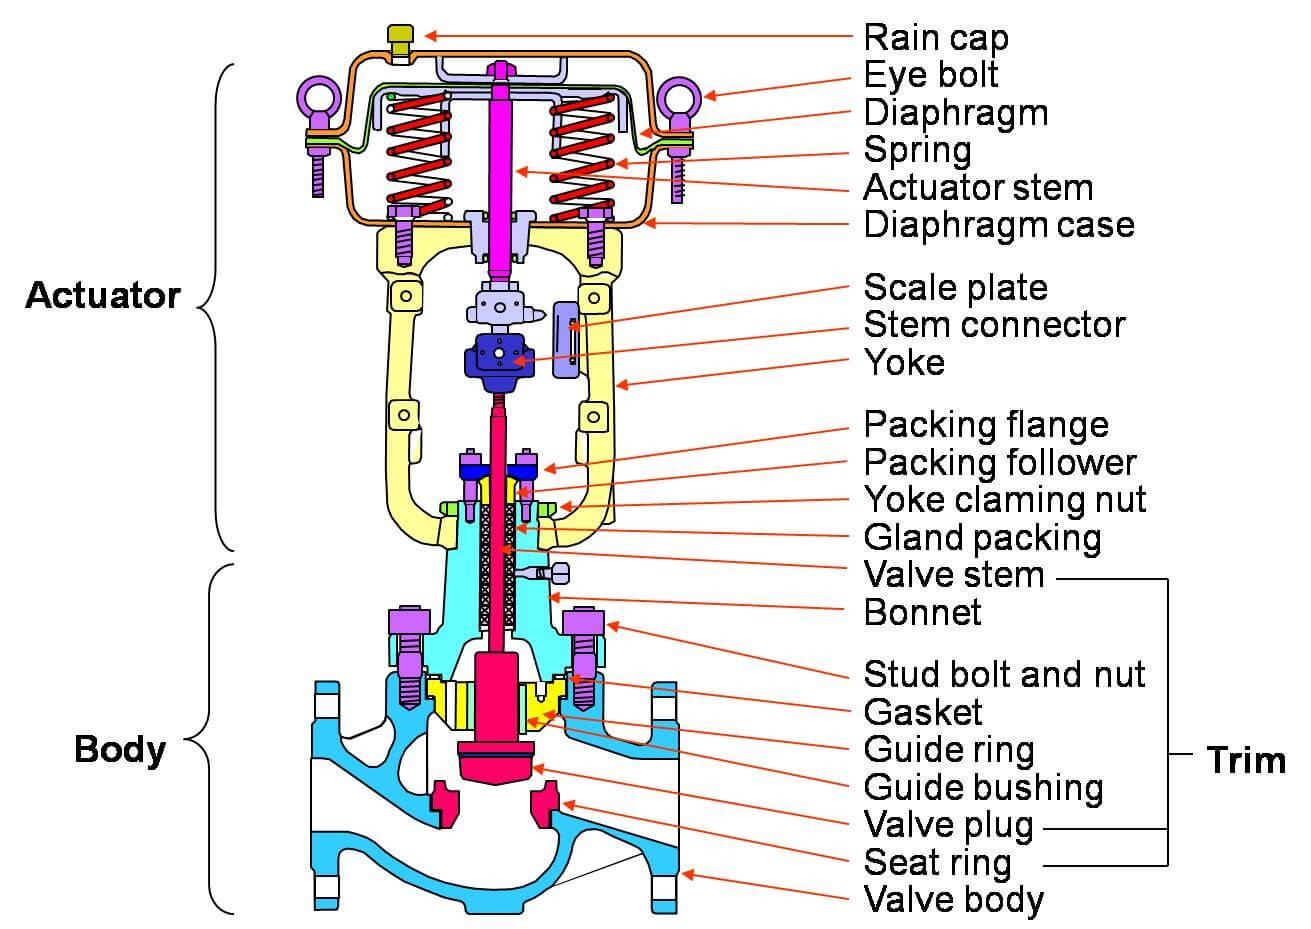 Components of motor valve